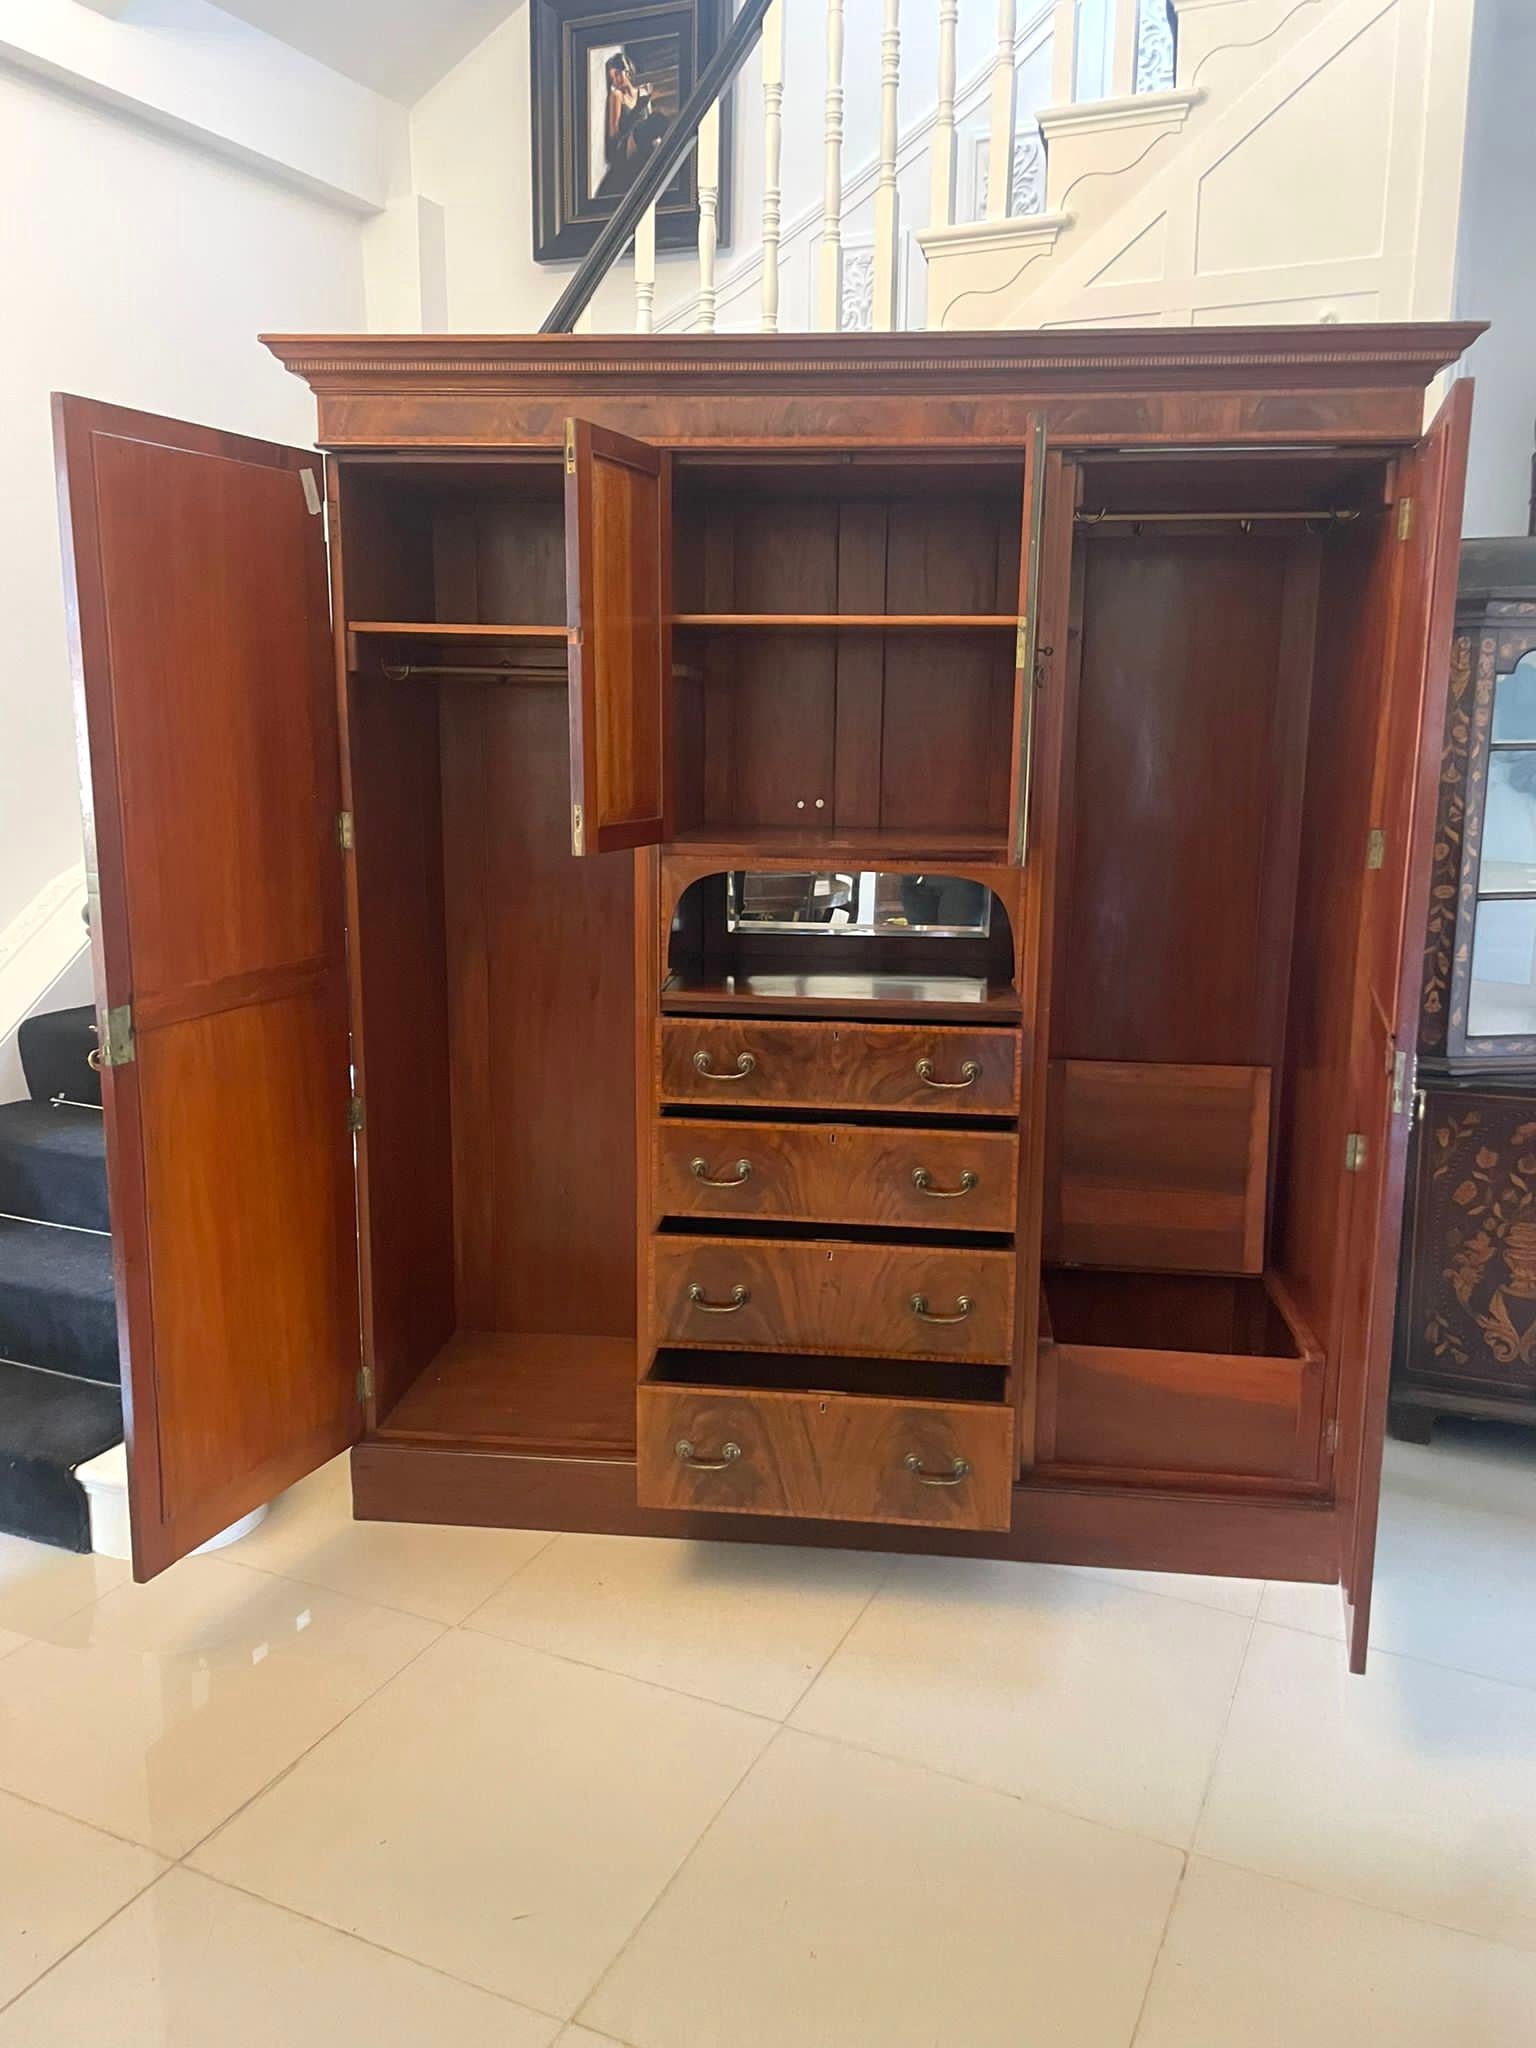 Large antique Edwardian quality mahogany marquetry inlaid wardrobe having a shaped figured mahogany cornice with satinwood inlay above a pair of quality marquetry inlaid doors opening to reveal a storage compartment, bevel edge mirror and 4 figured